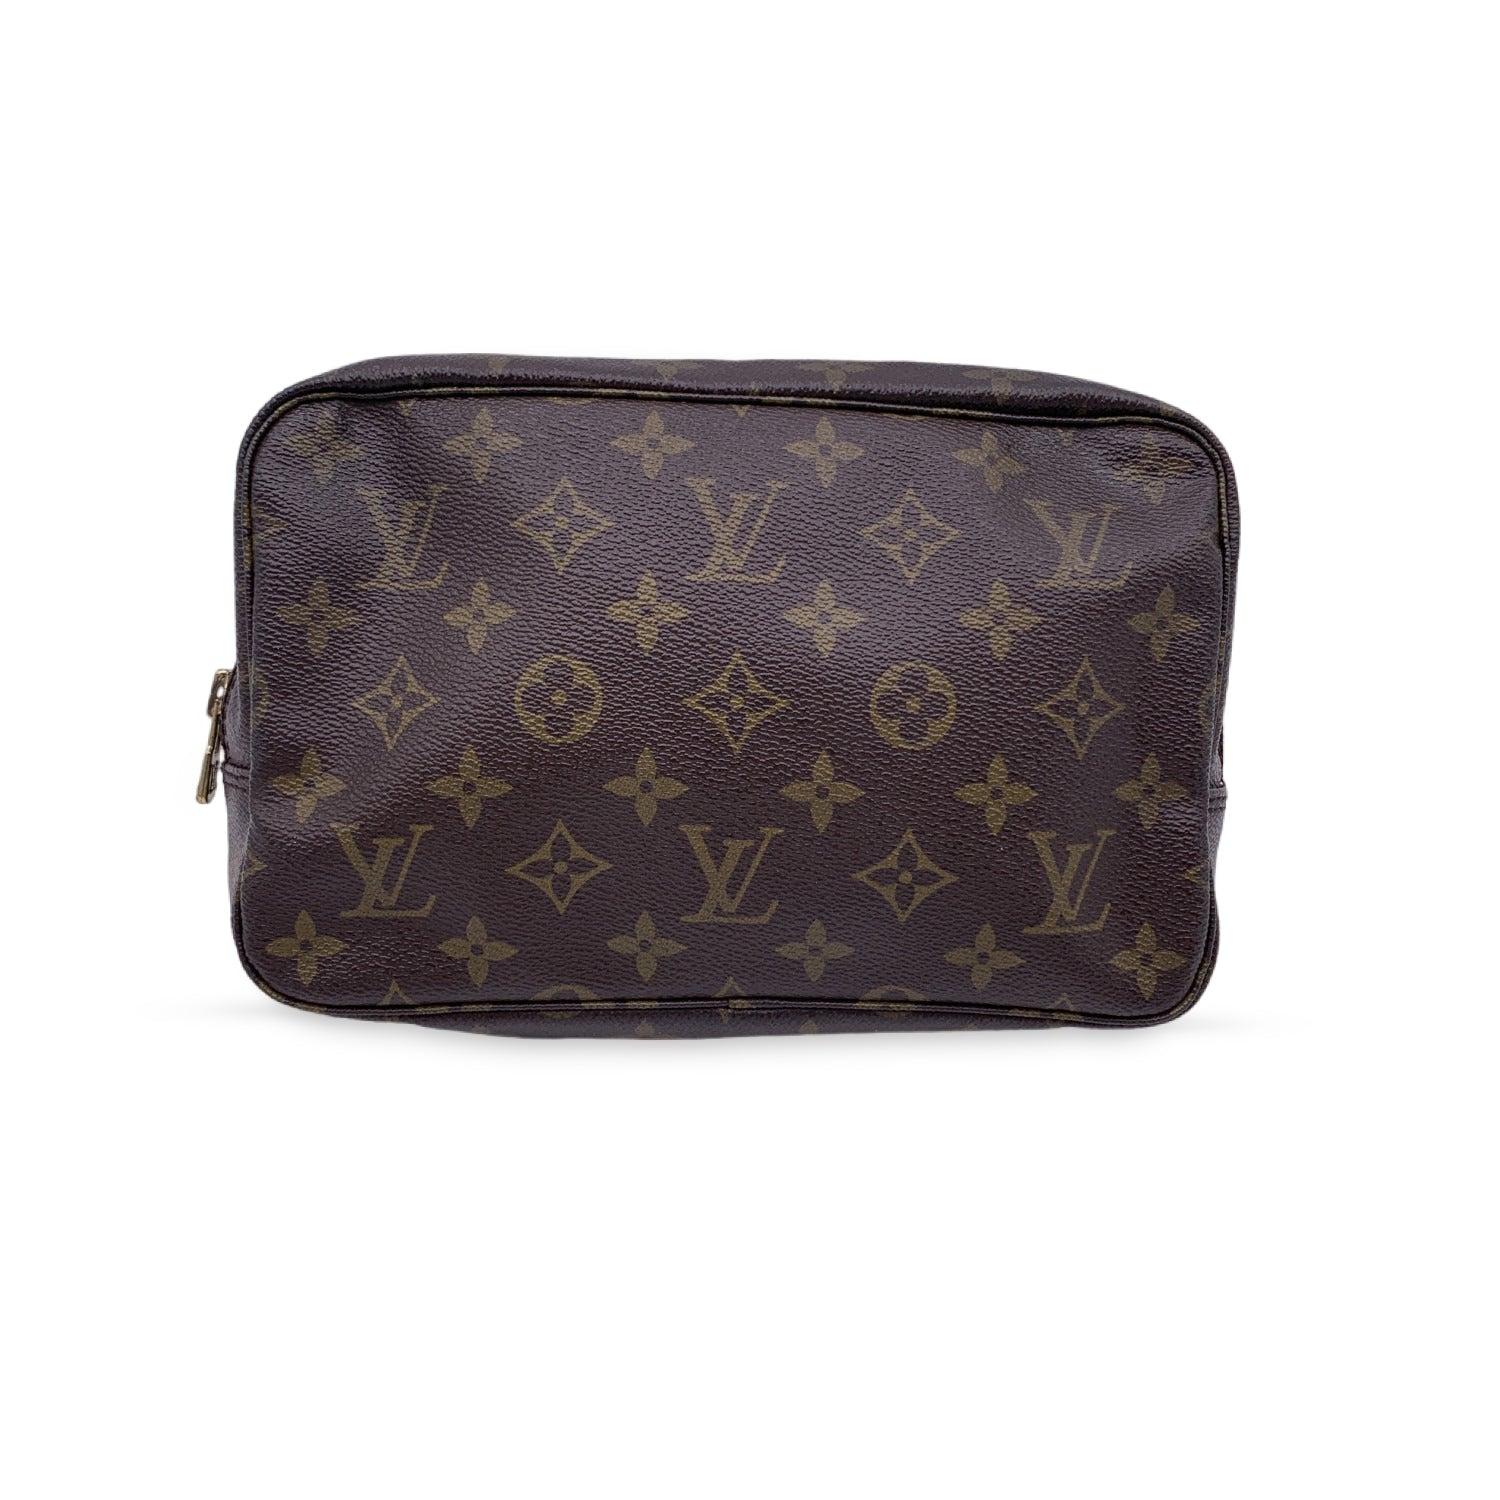 LOUIS VUITTON Paris - Made in France' tag inside. Data code engraved inside (TH 8901). Condition A - EXCELLENT Gently used. As seen in pictures. Details MATERIAL: Cloth COLOR: Brown MODEL: Trousse de Toilette GENDER: Unisex Adults COUNTRY OF